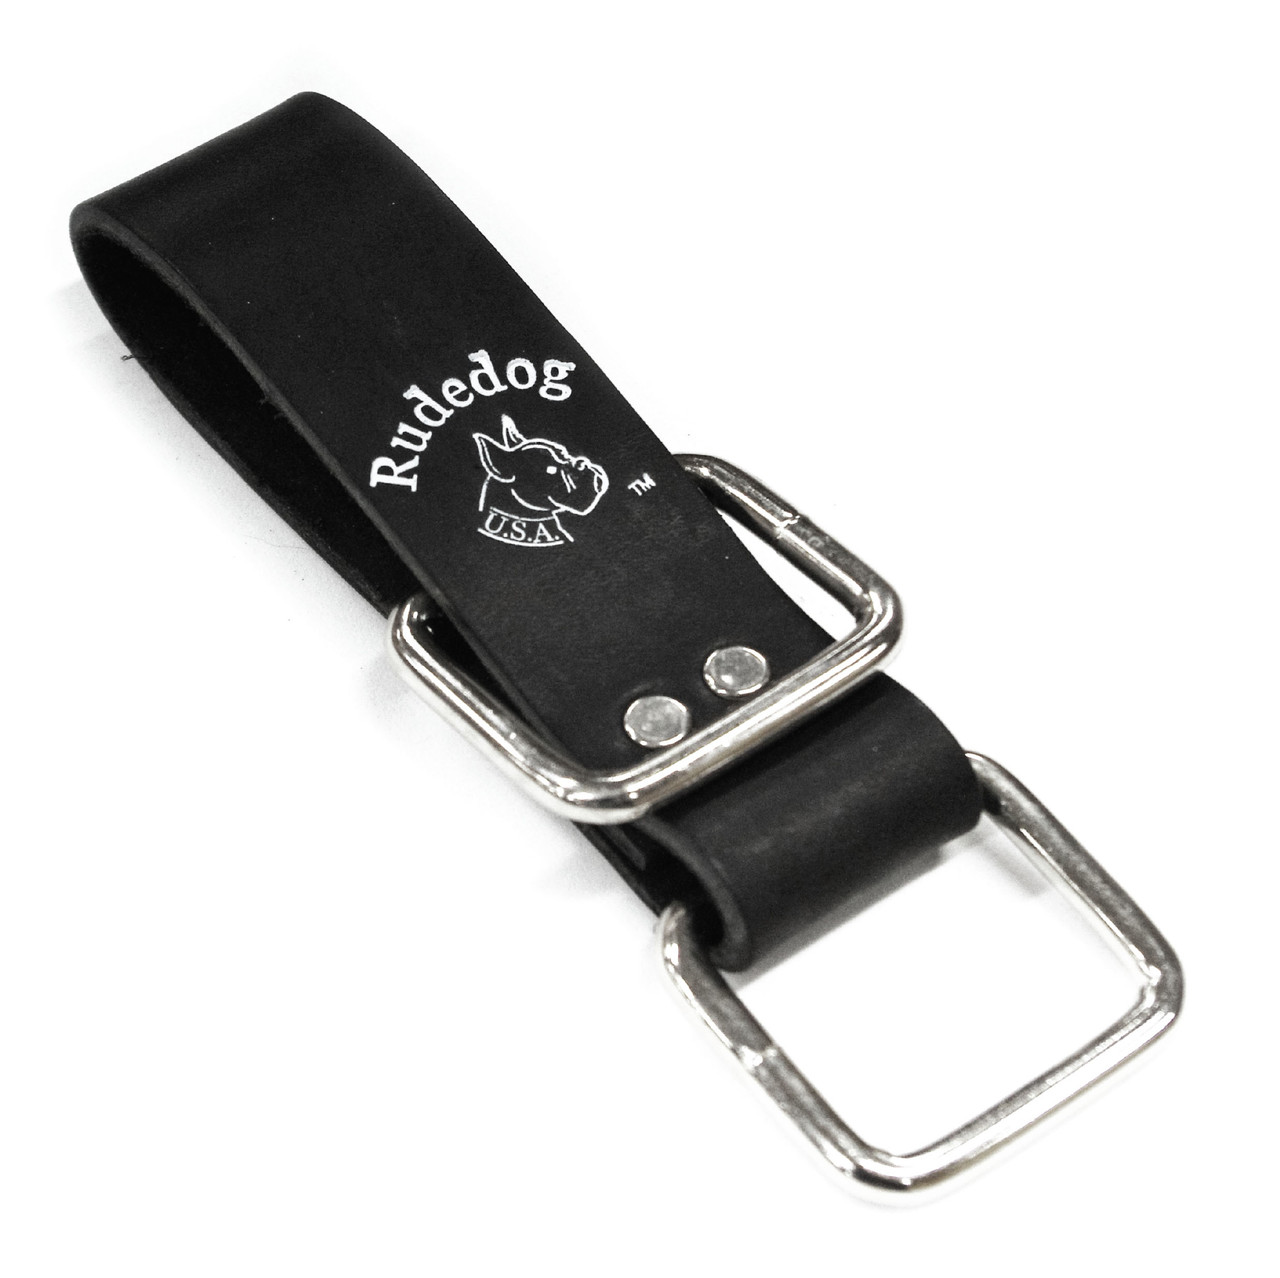 Rudedog Tool Lanyard Tether Holder from Columbia Safety